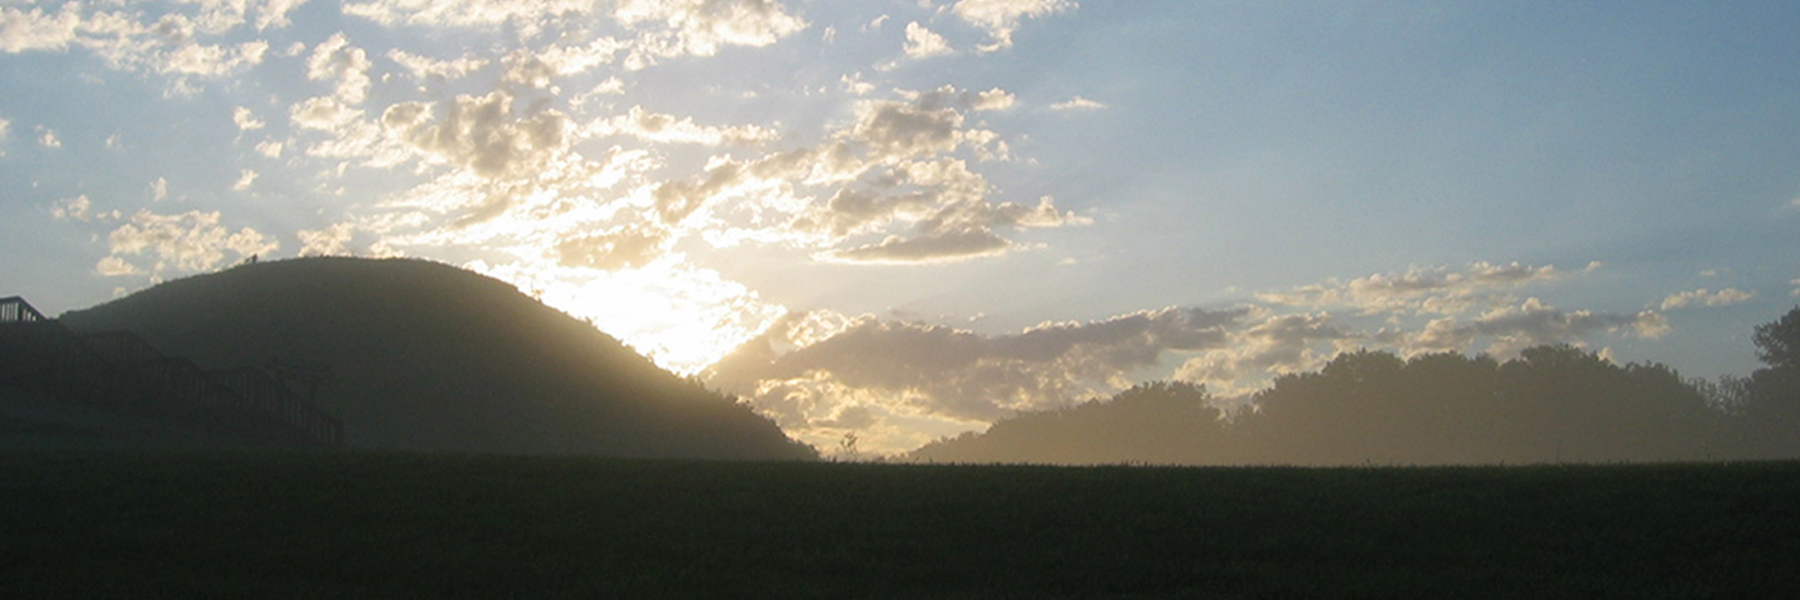 Sunrise over the Angel Mounds